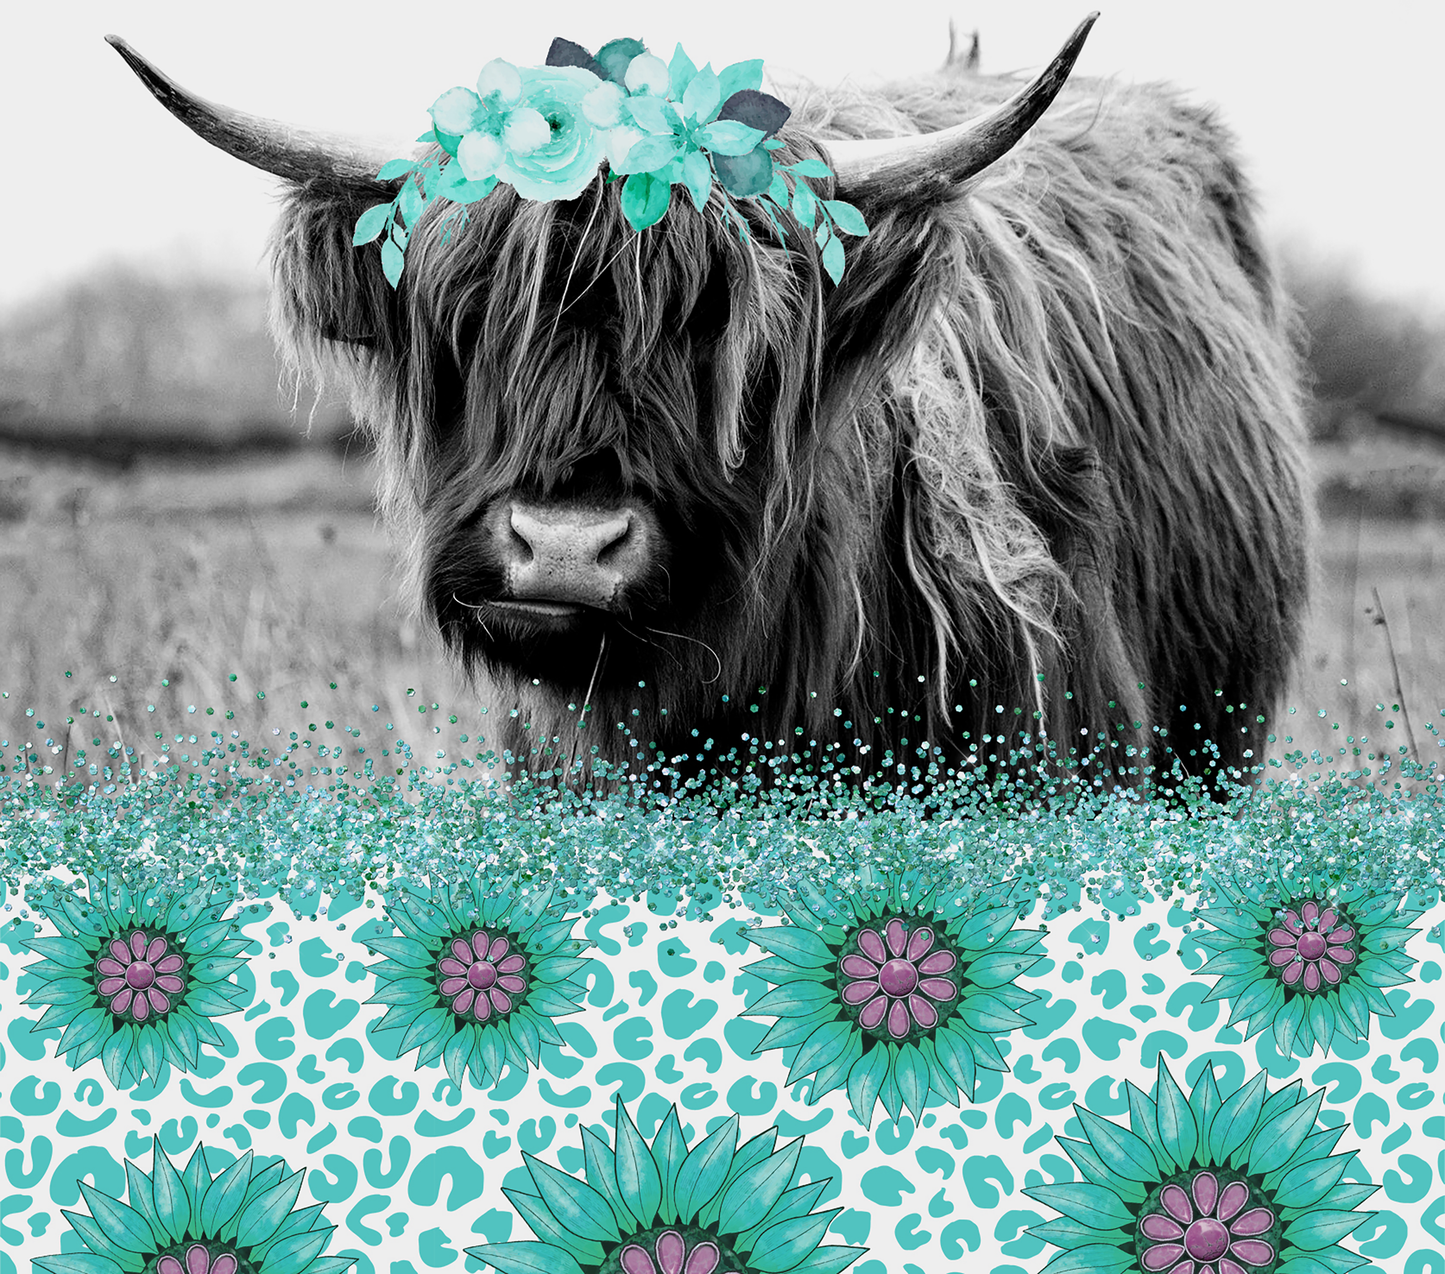 262 Black cow with teal backgroun